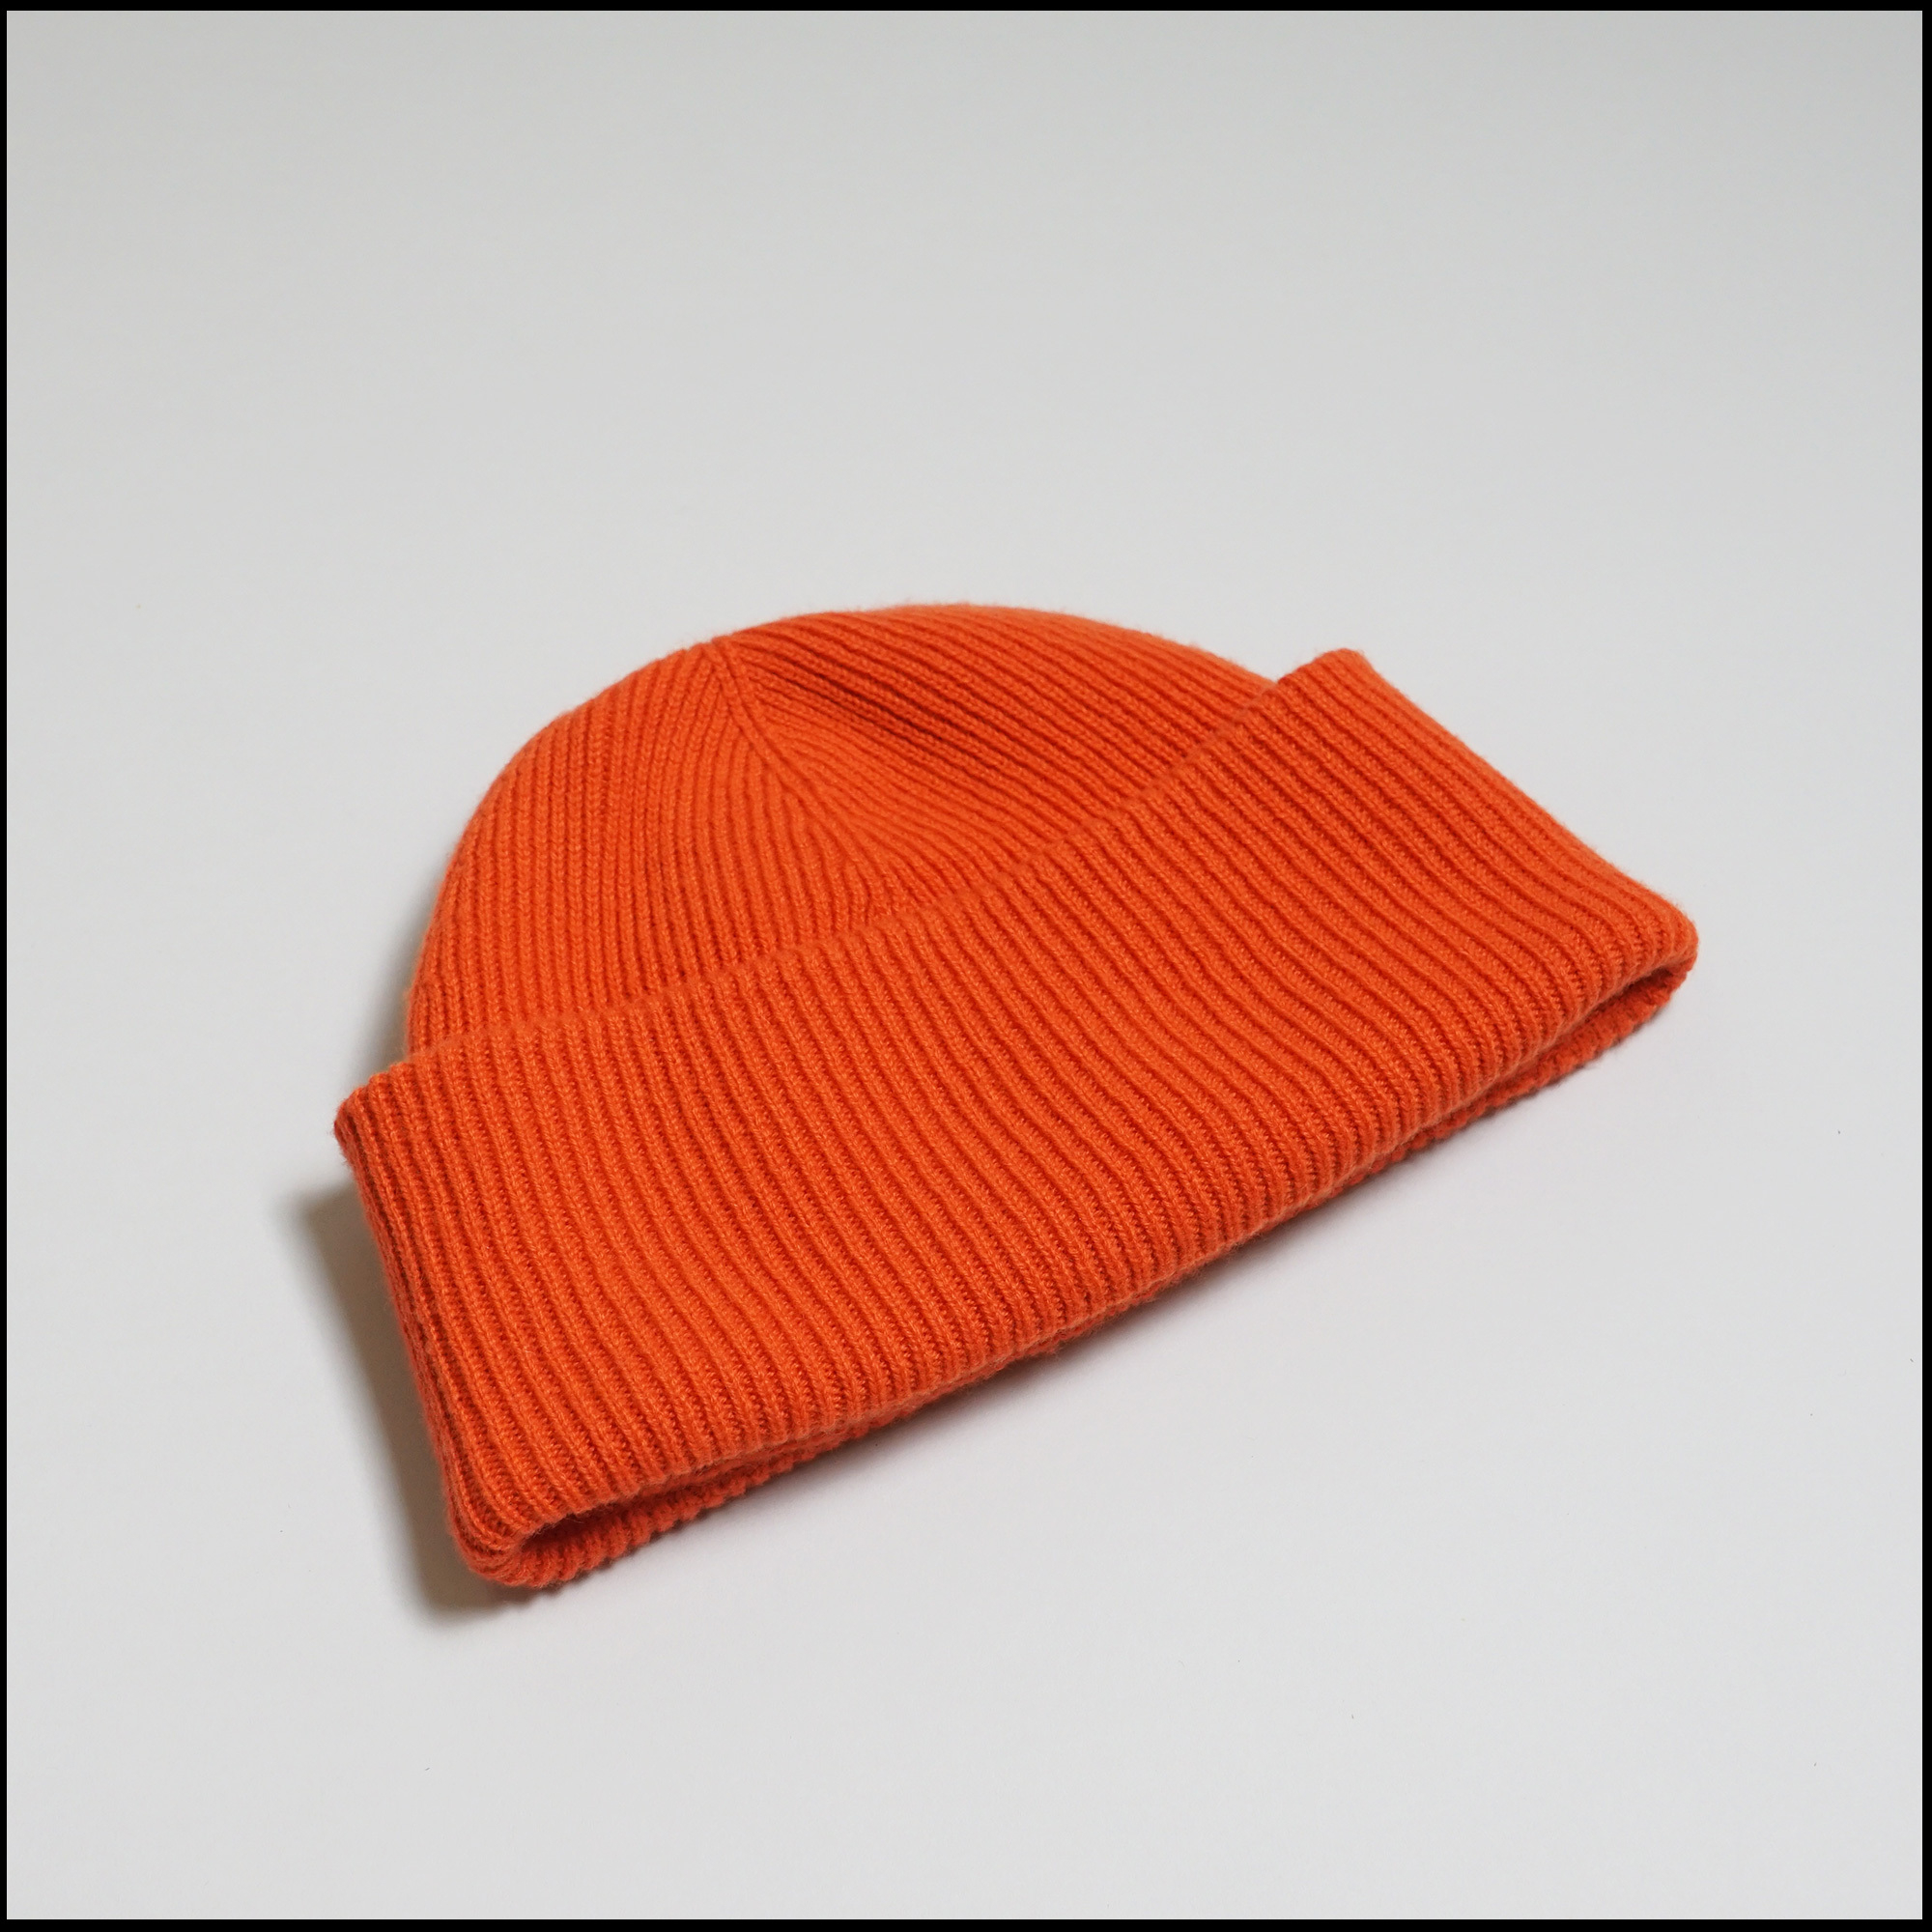 Day Balaclava in Orange color by Arpenteur for C'H'C'M'